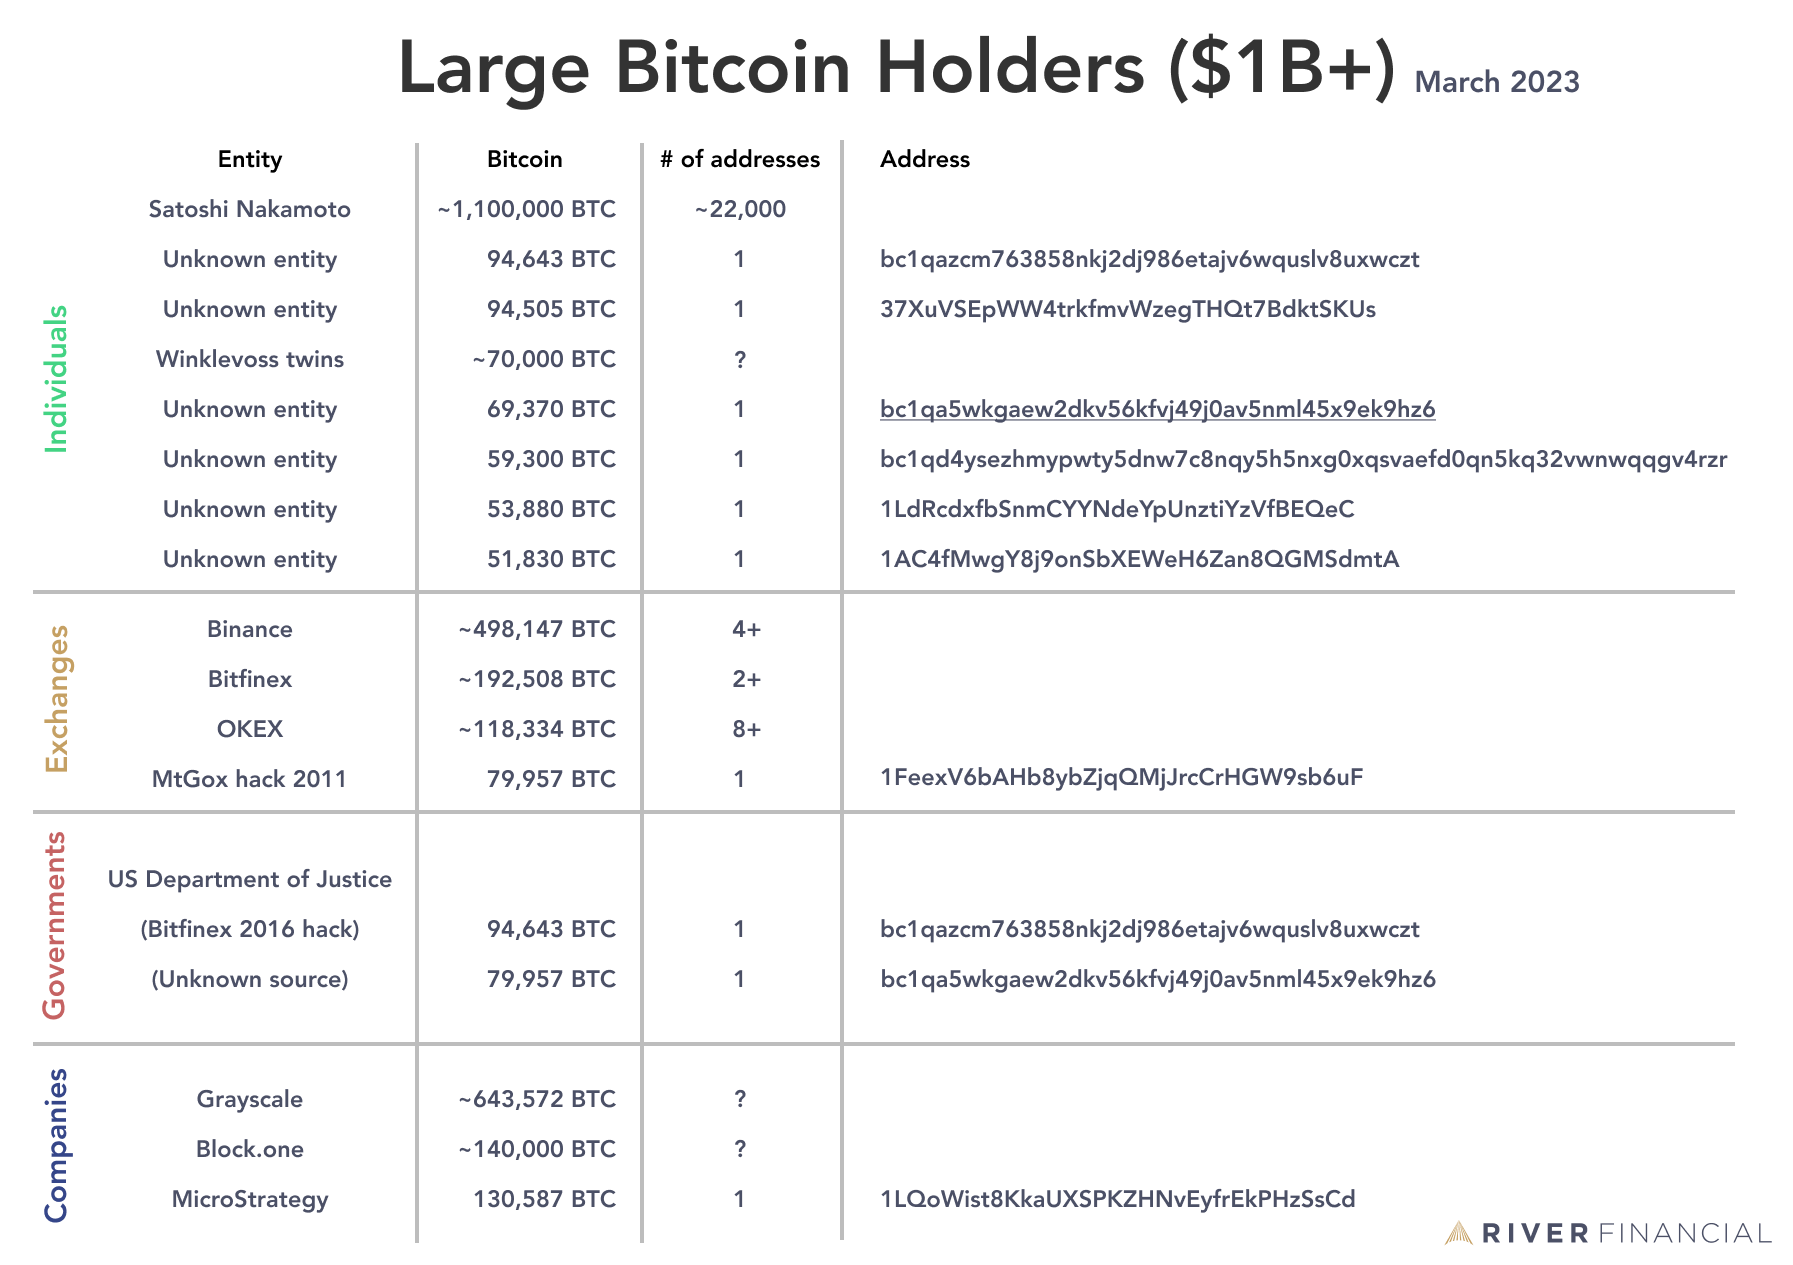 An overview of entities with over $1 billion in bitcoin, across individuals, exchanges, governments, and companies